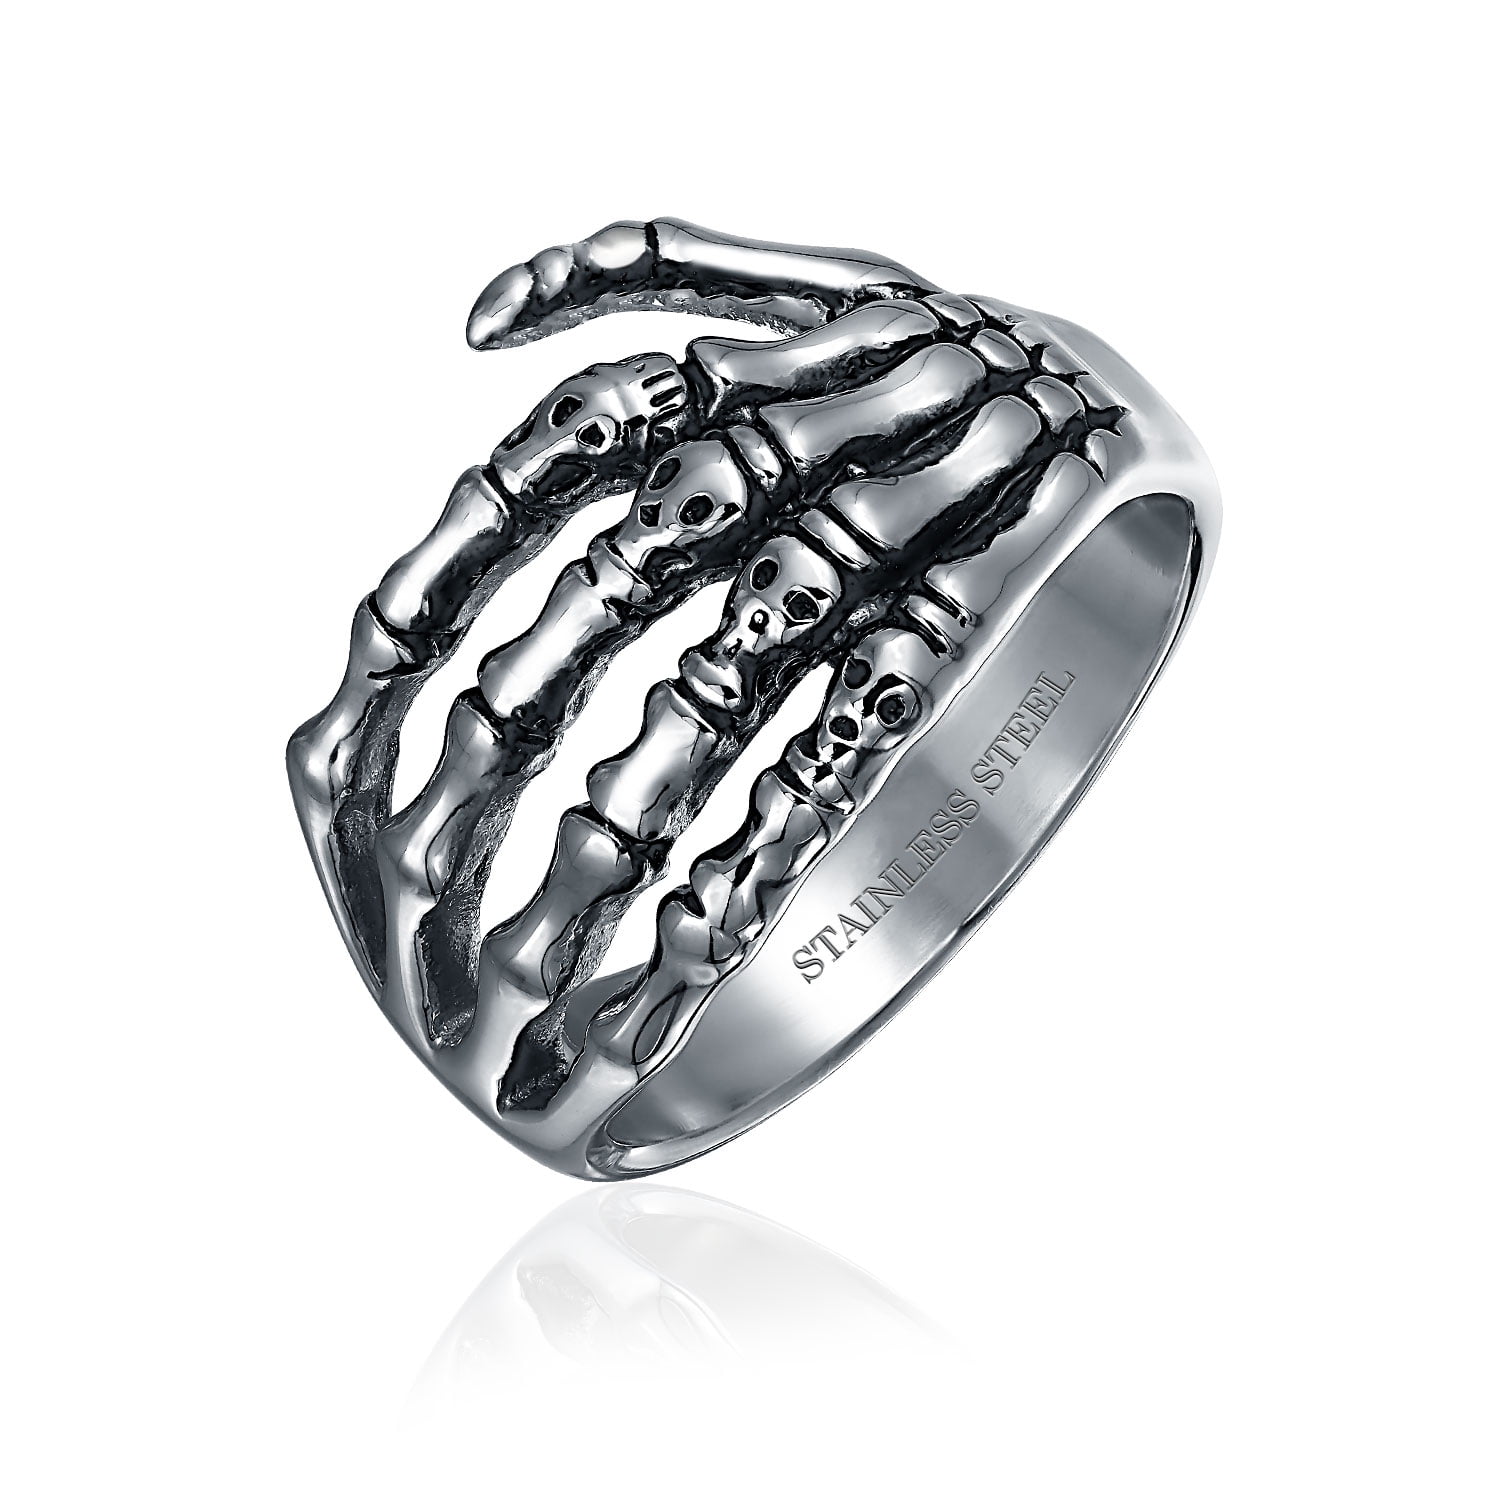 West Coast Jewelry Stainless Steel Intertwined Triple Band Ring (5)